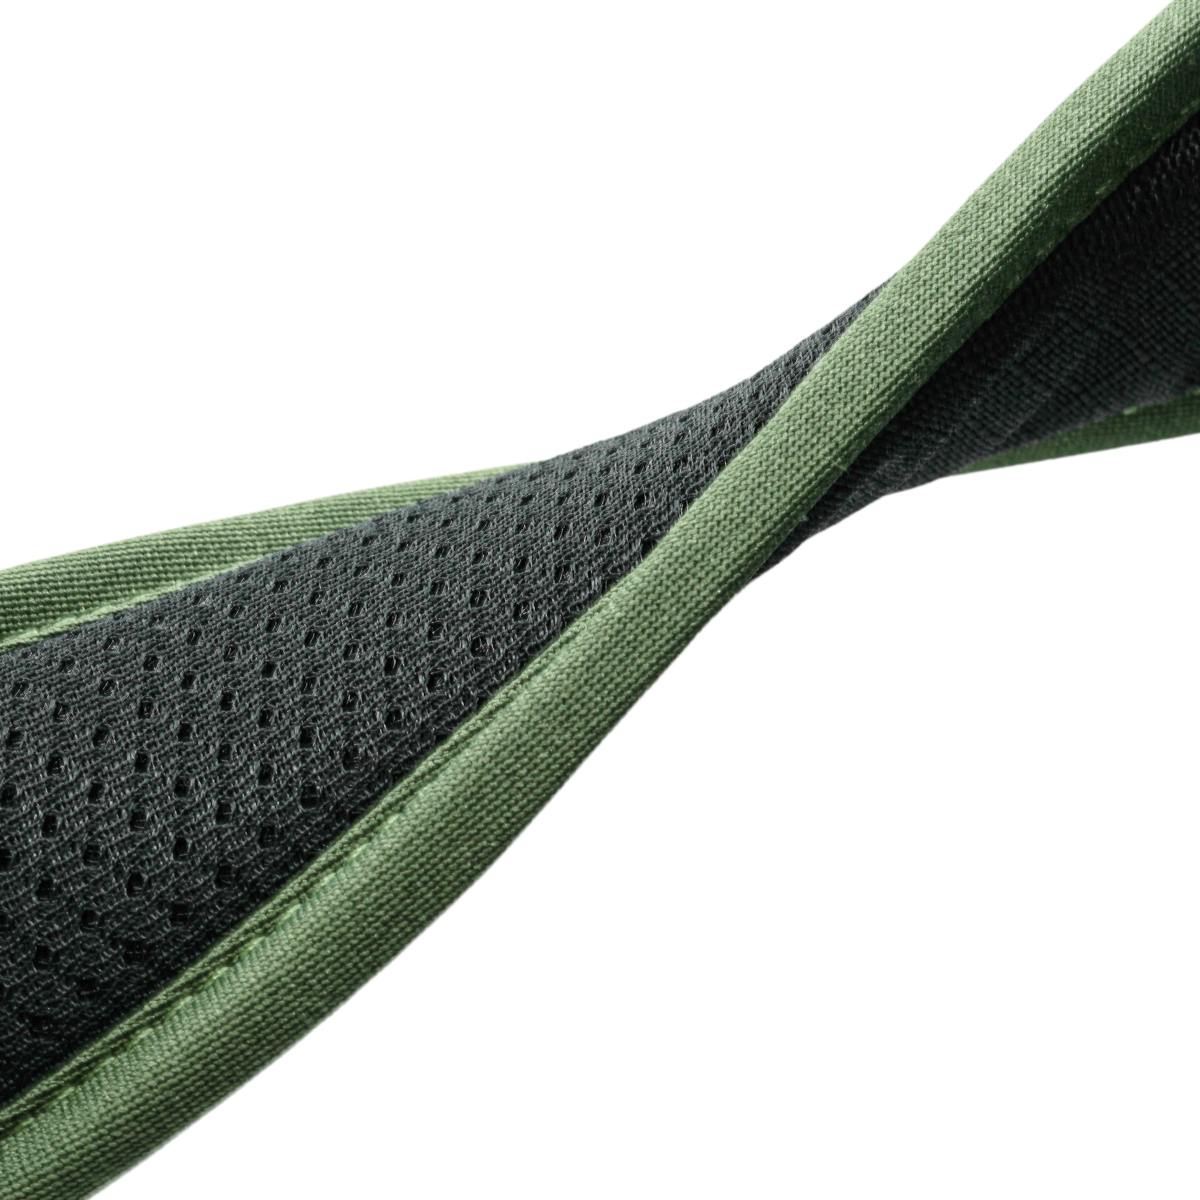 Green Air Mesh Padding close up view showing the details of the collar